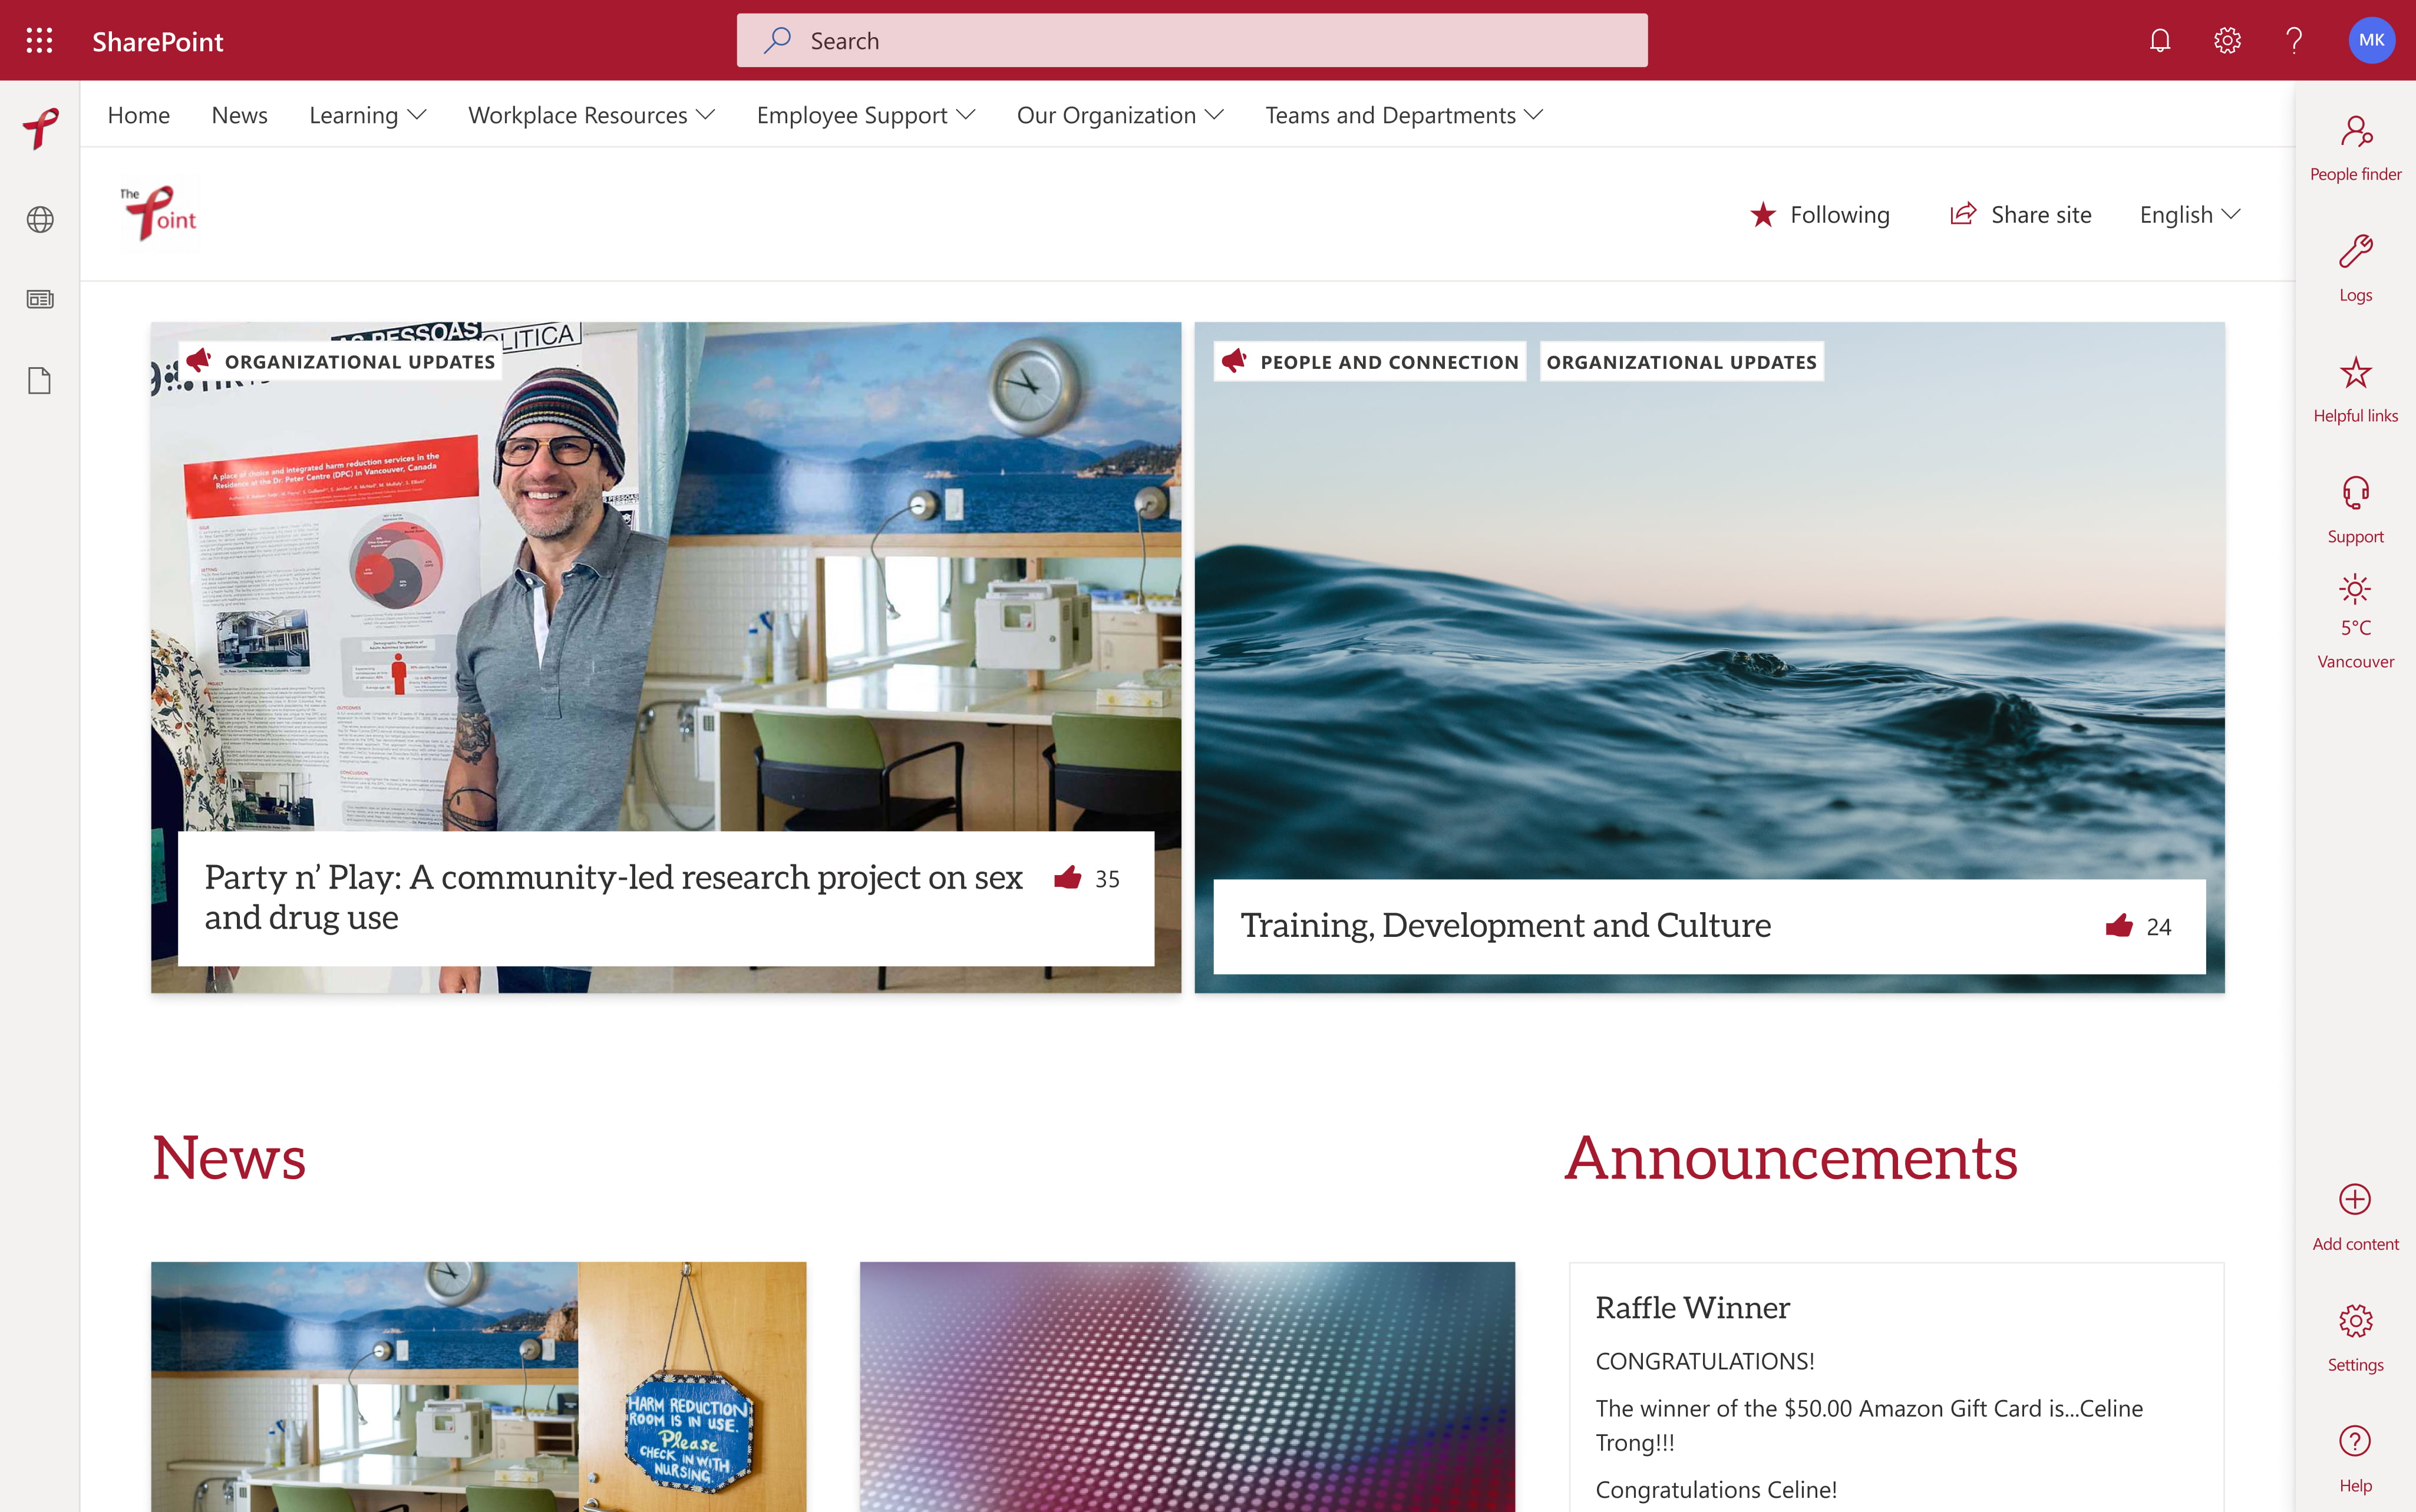 The desktop view of the featured news web part on Dr. Peter's GO intranet homepage.